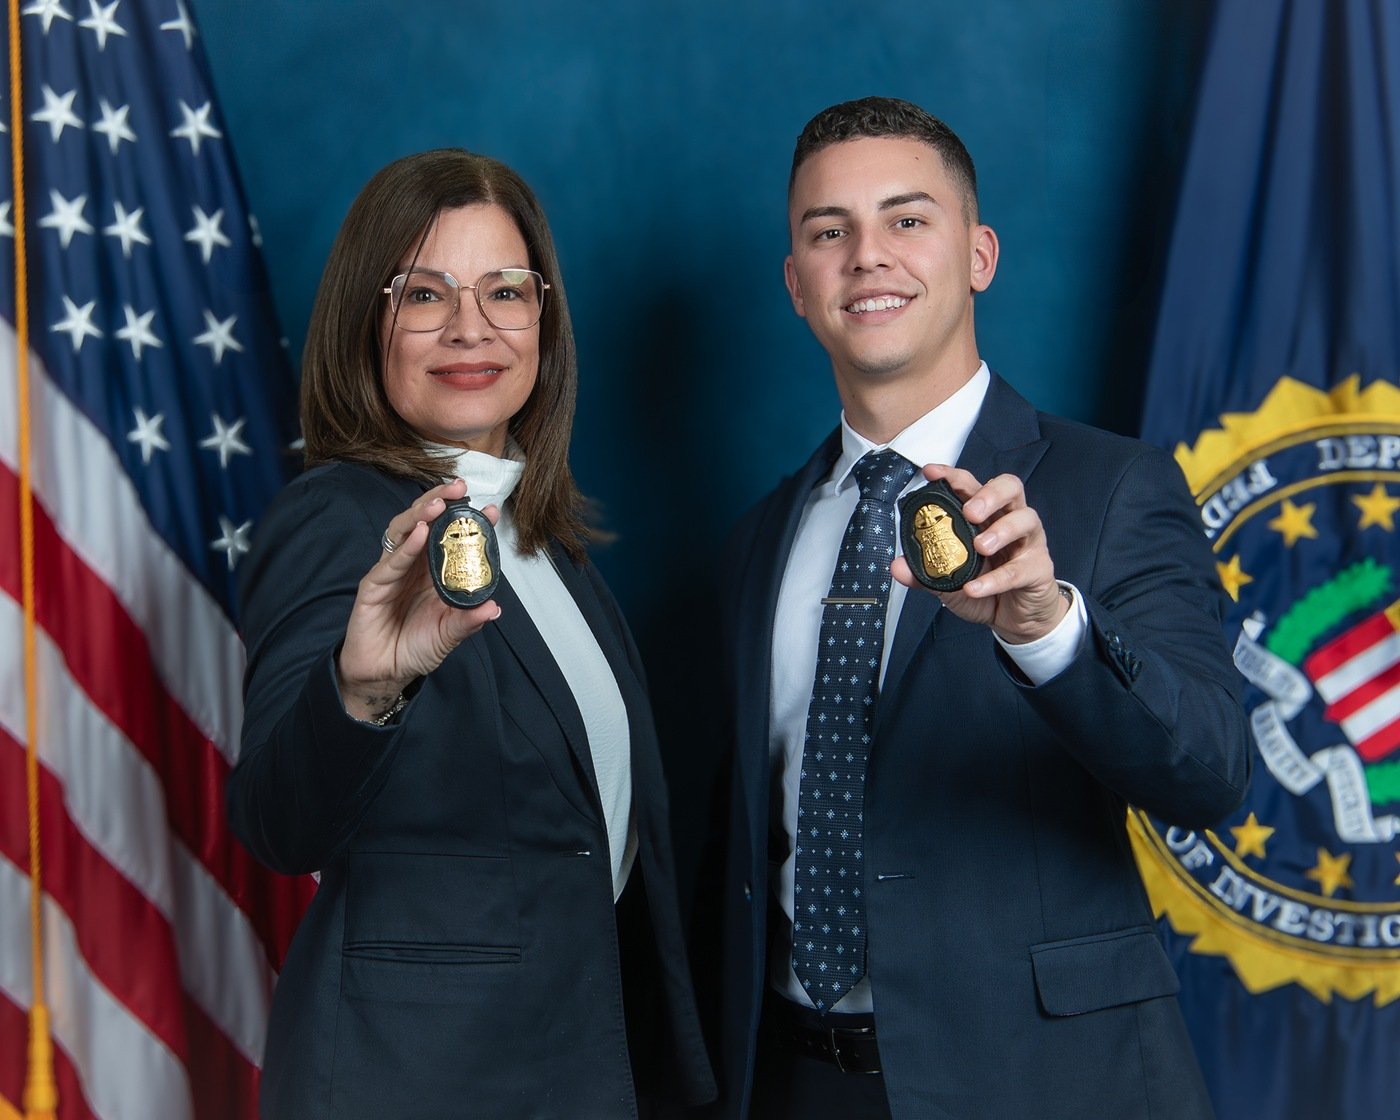 Supervisory Special Agent Marilyn Santos and Special Agent Kevin Vázquez, both of FBI San Juan, pose for a photo with their badges in front of the American flag and the FBI flag.